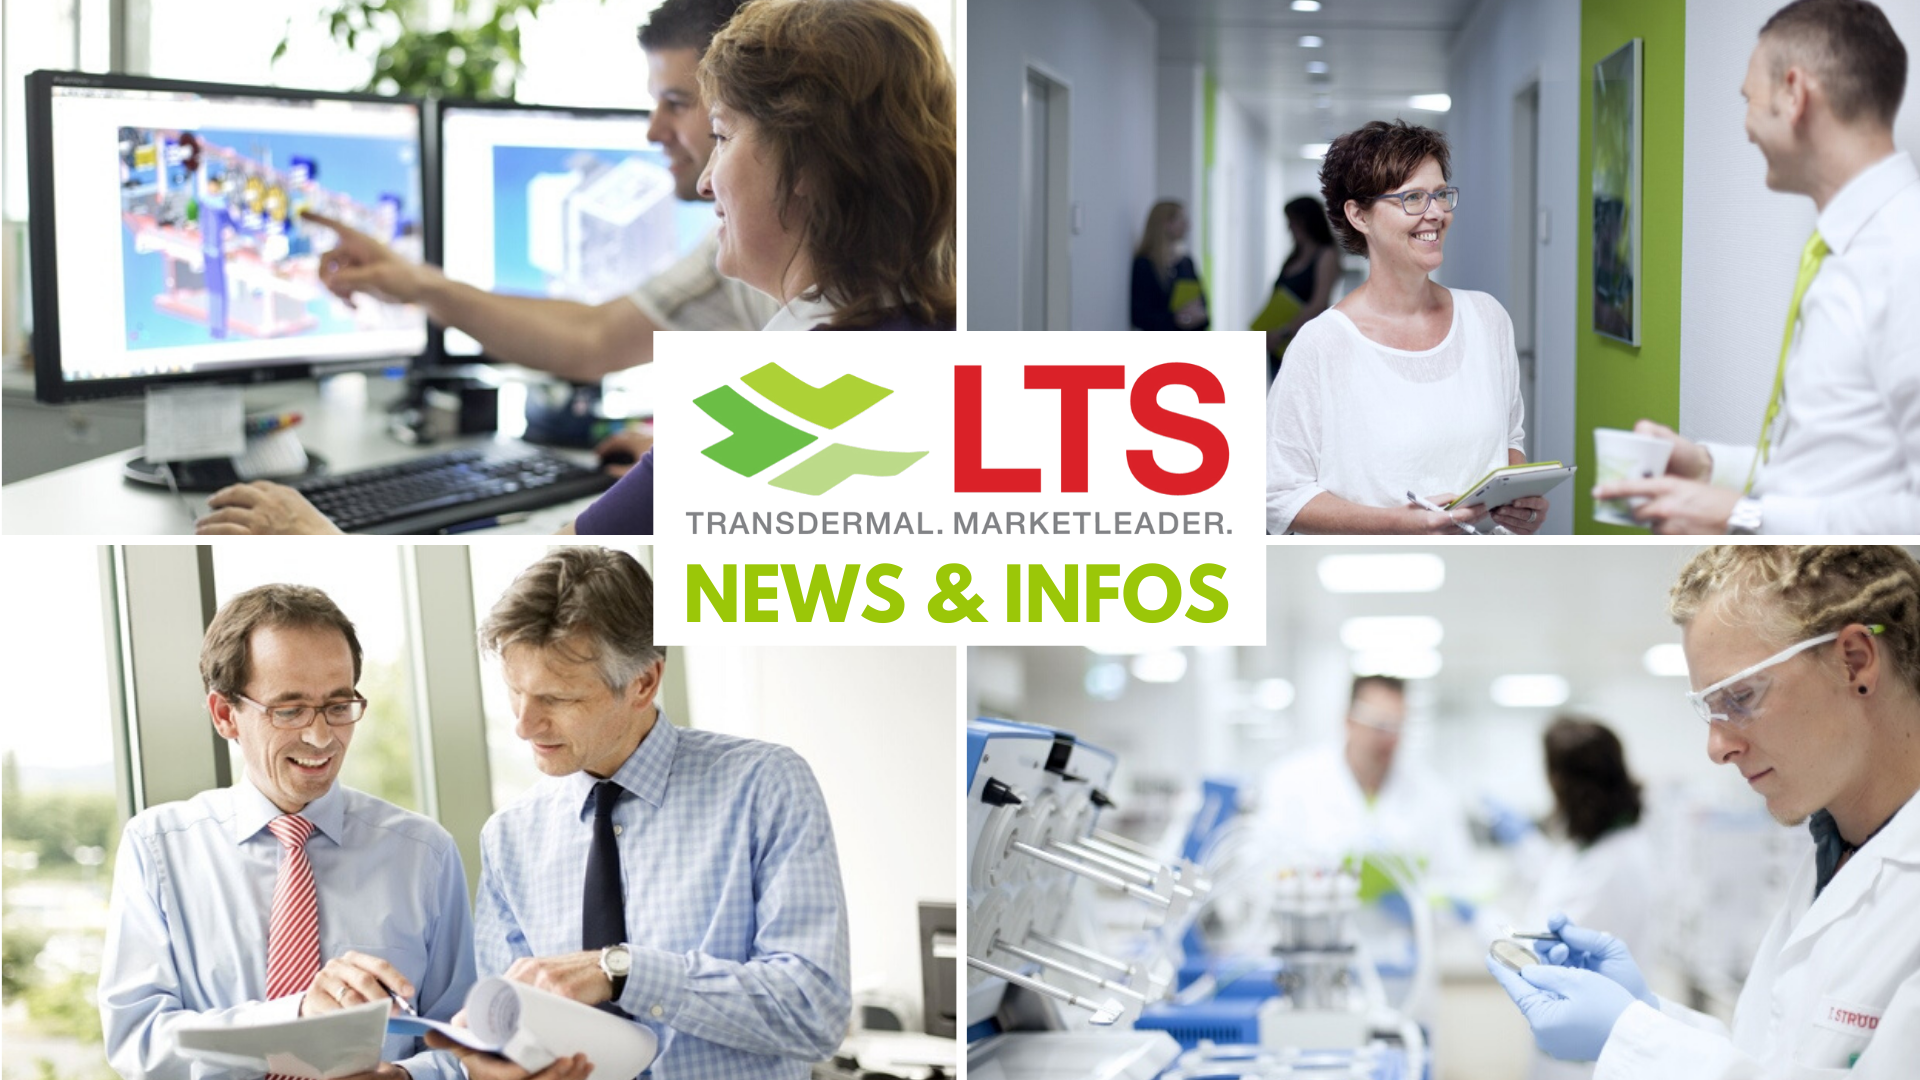 Find news and infos about LTS